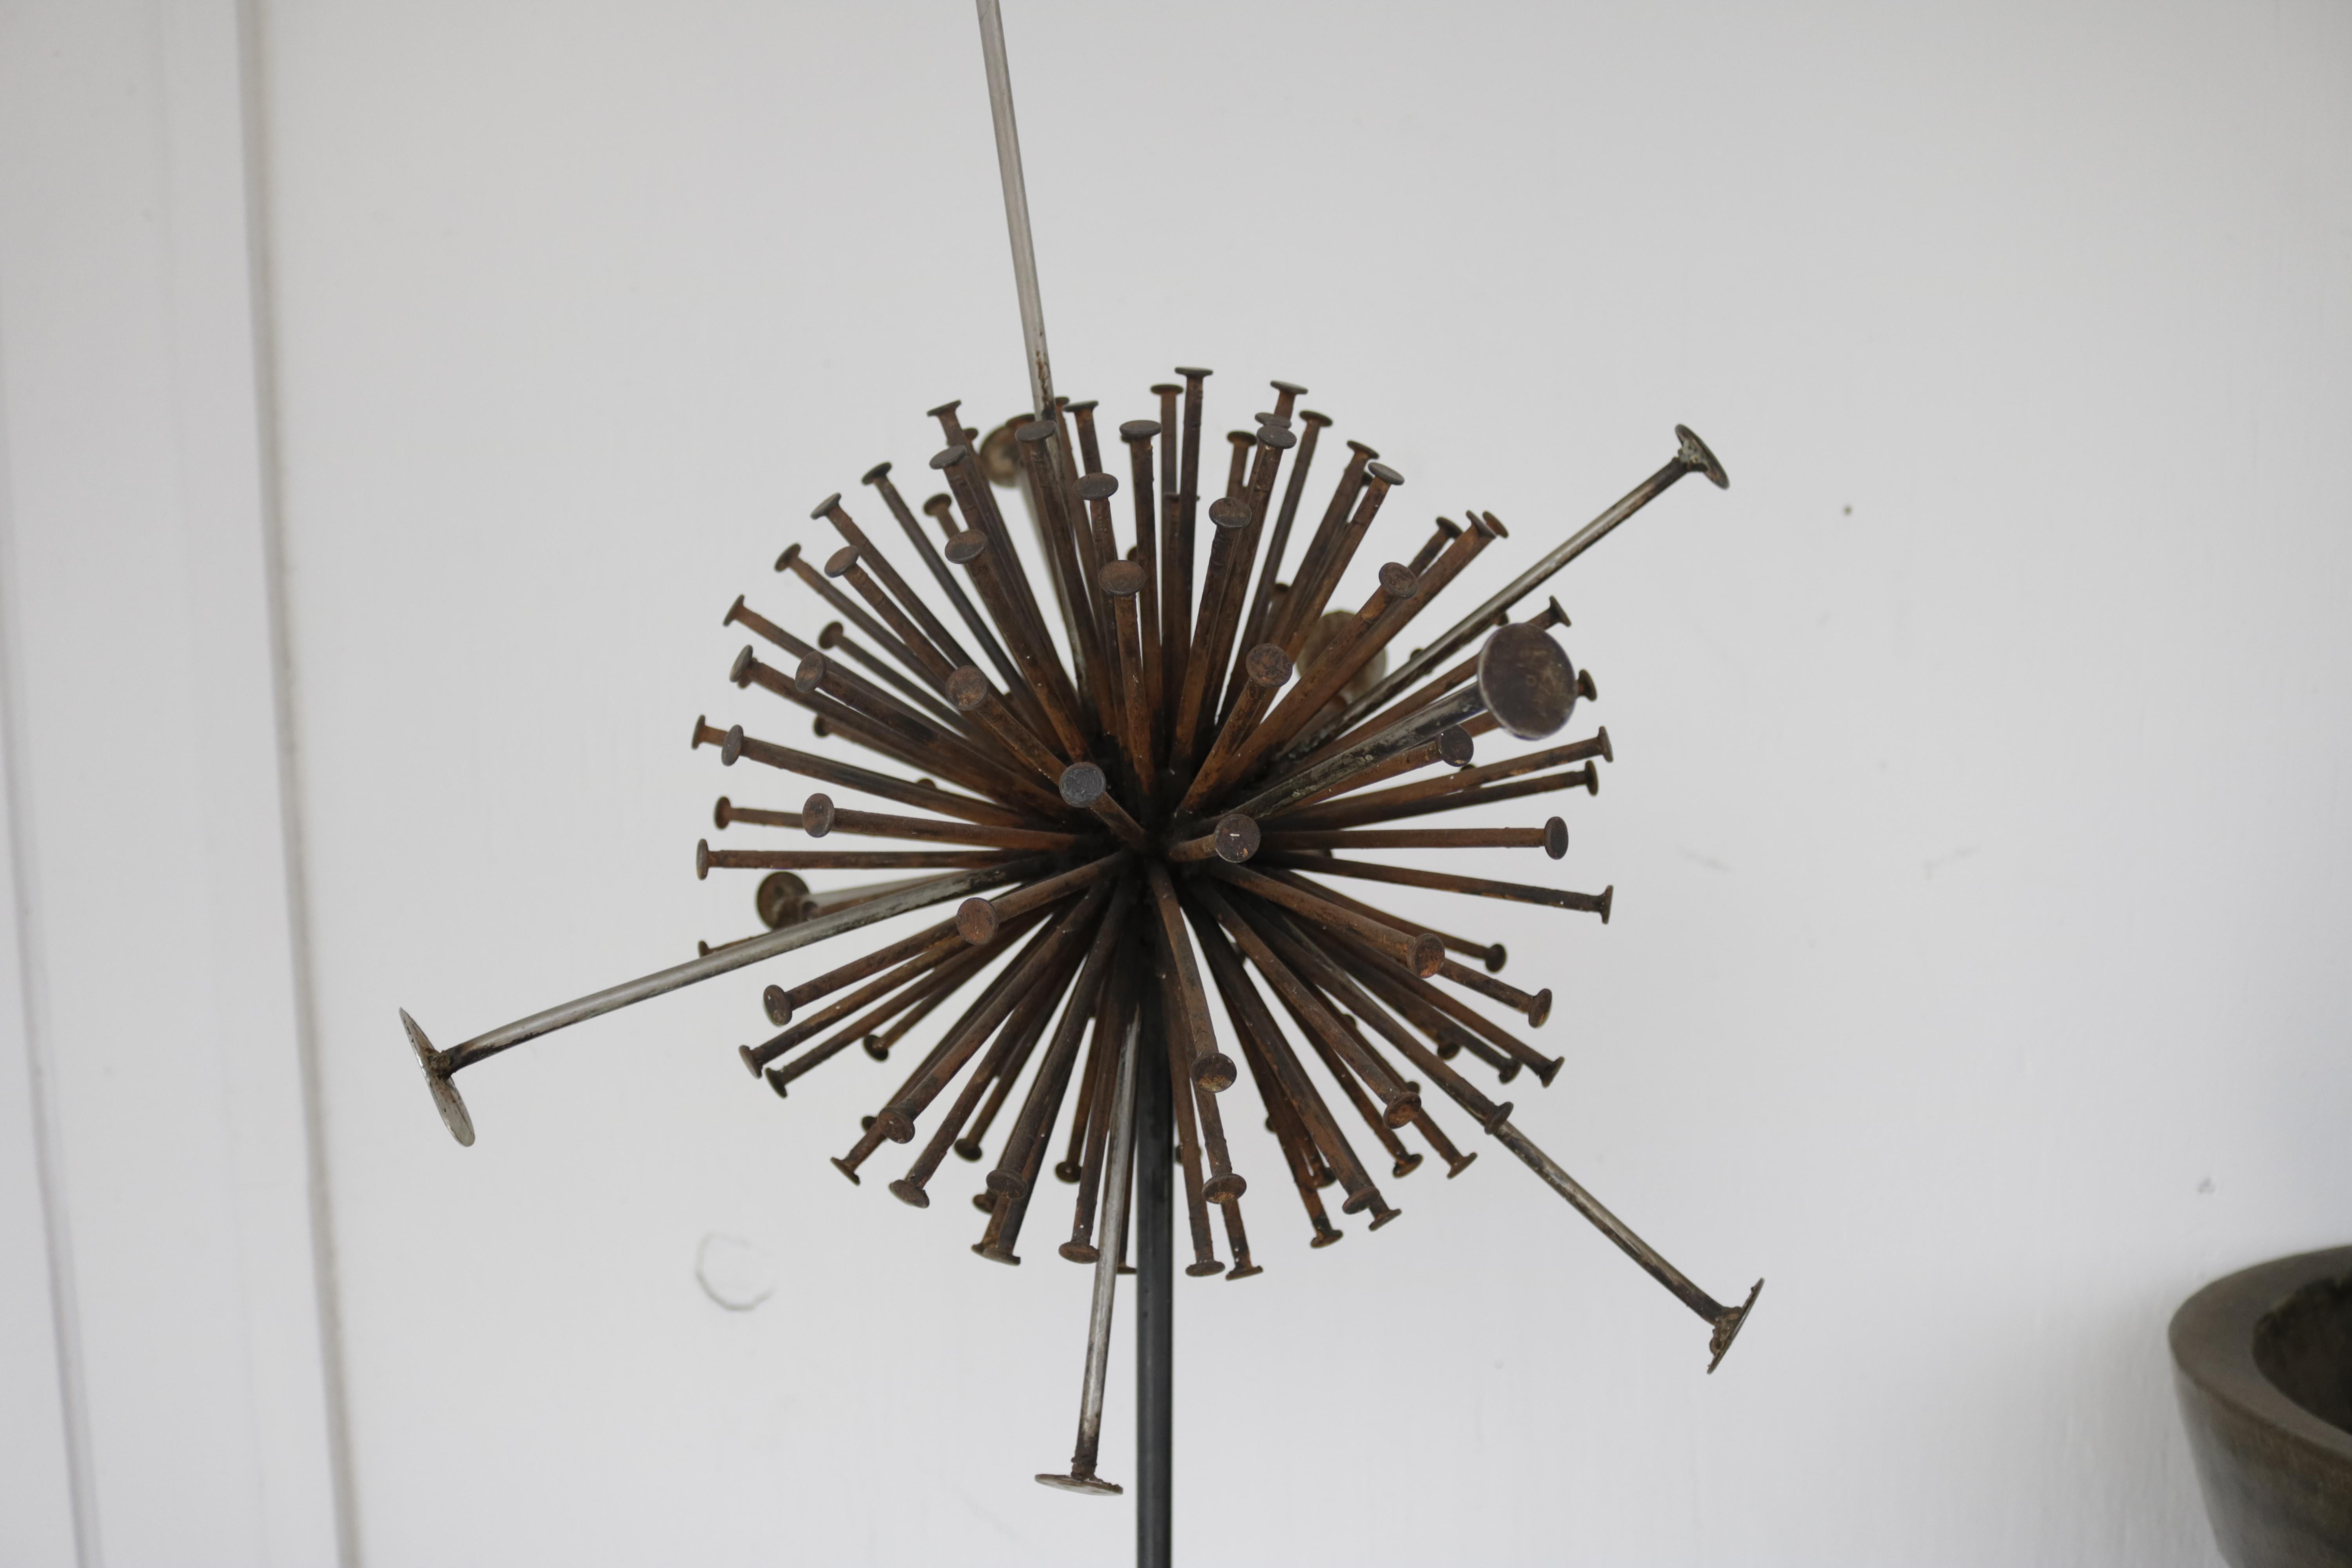 This brutalist metal round sculpture has an amazing patina and a very modern feel. The piece, composed of rusted nails, steel, and a wood base is heavily influenced by Brutalist aesthetics.